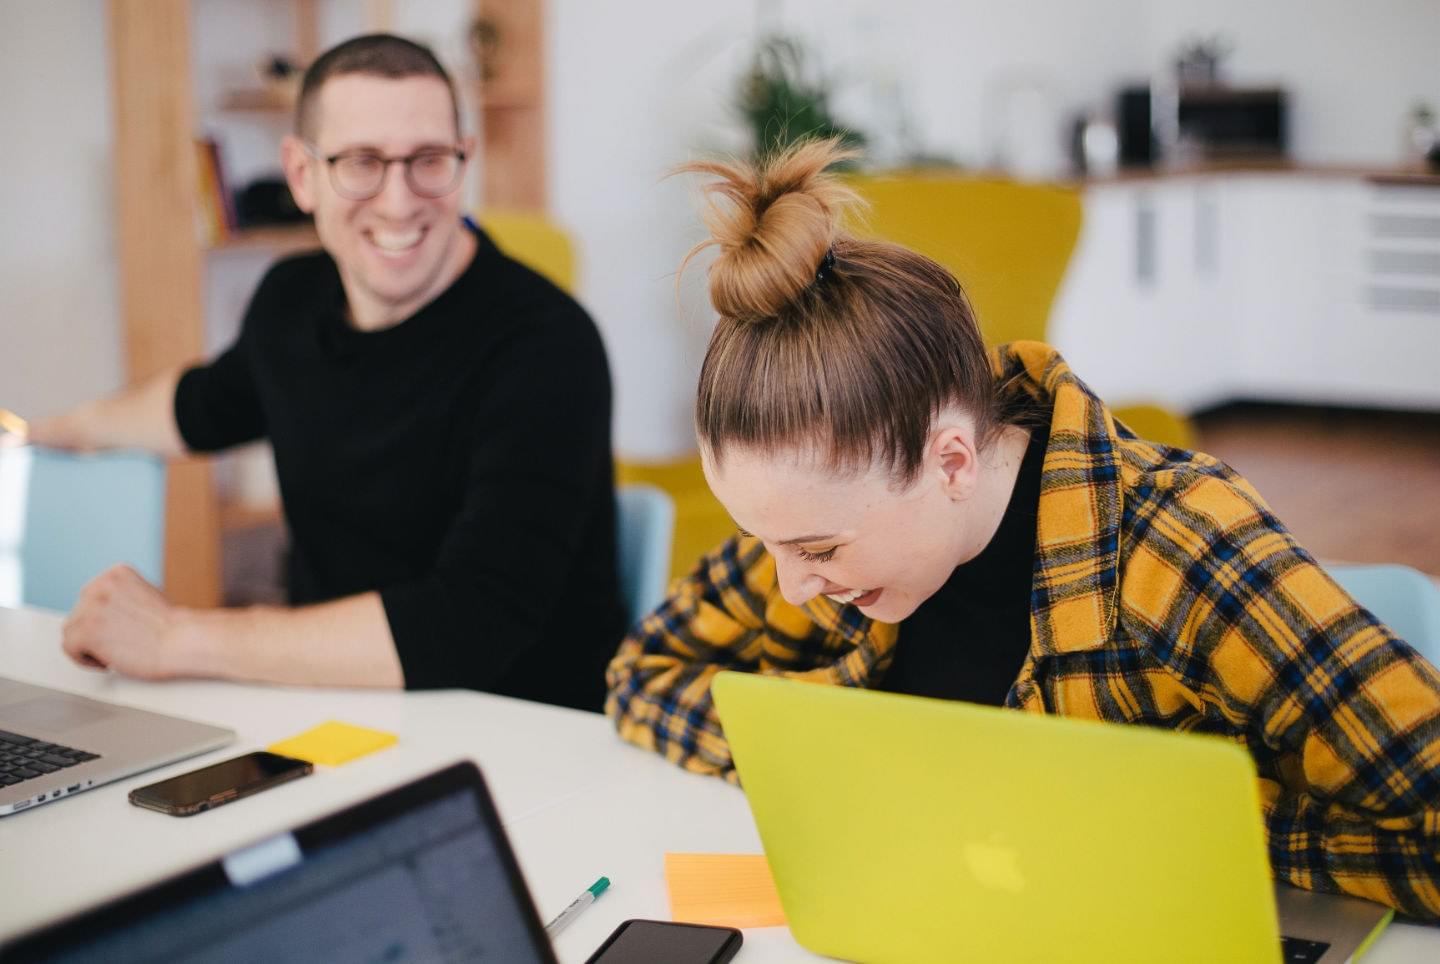 An image of 2 work colleagues laughing at something funny. The man is in a black jumper looking at his co-worker and laughing. His co-worker is female and she is wearing a yellow and black patterned shirt.